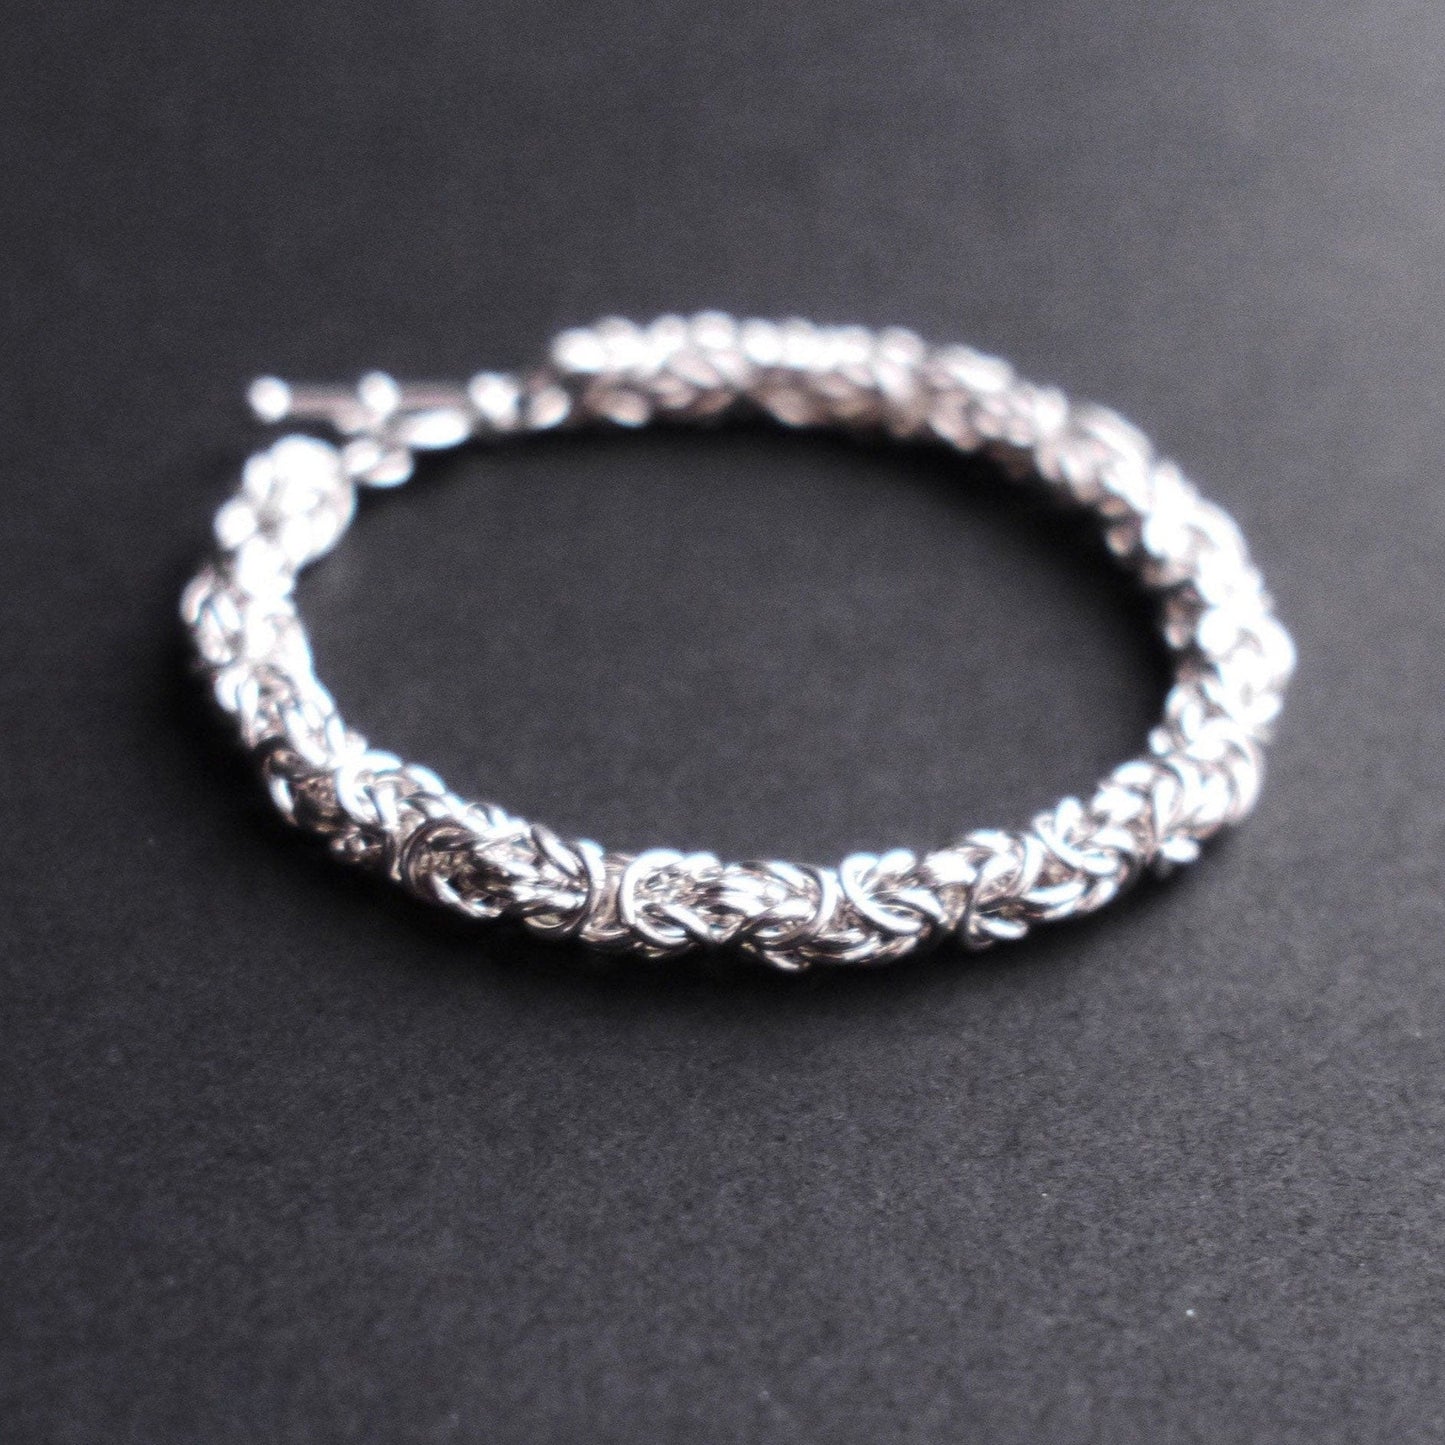 6mm Byzantine Chainmaille Bracelet in Sterling Silver